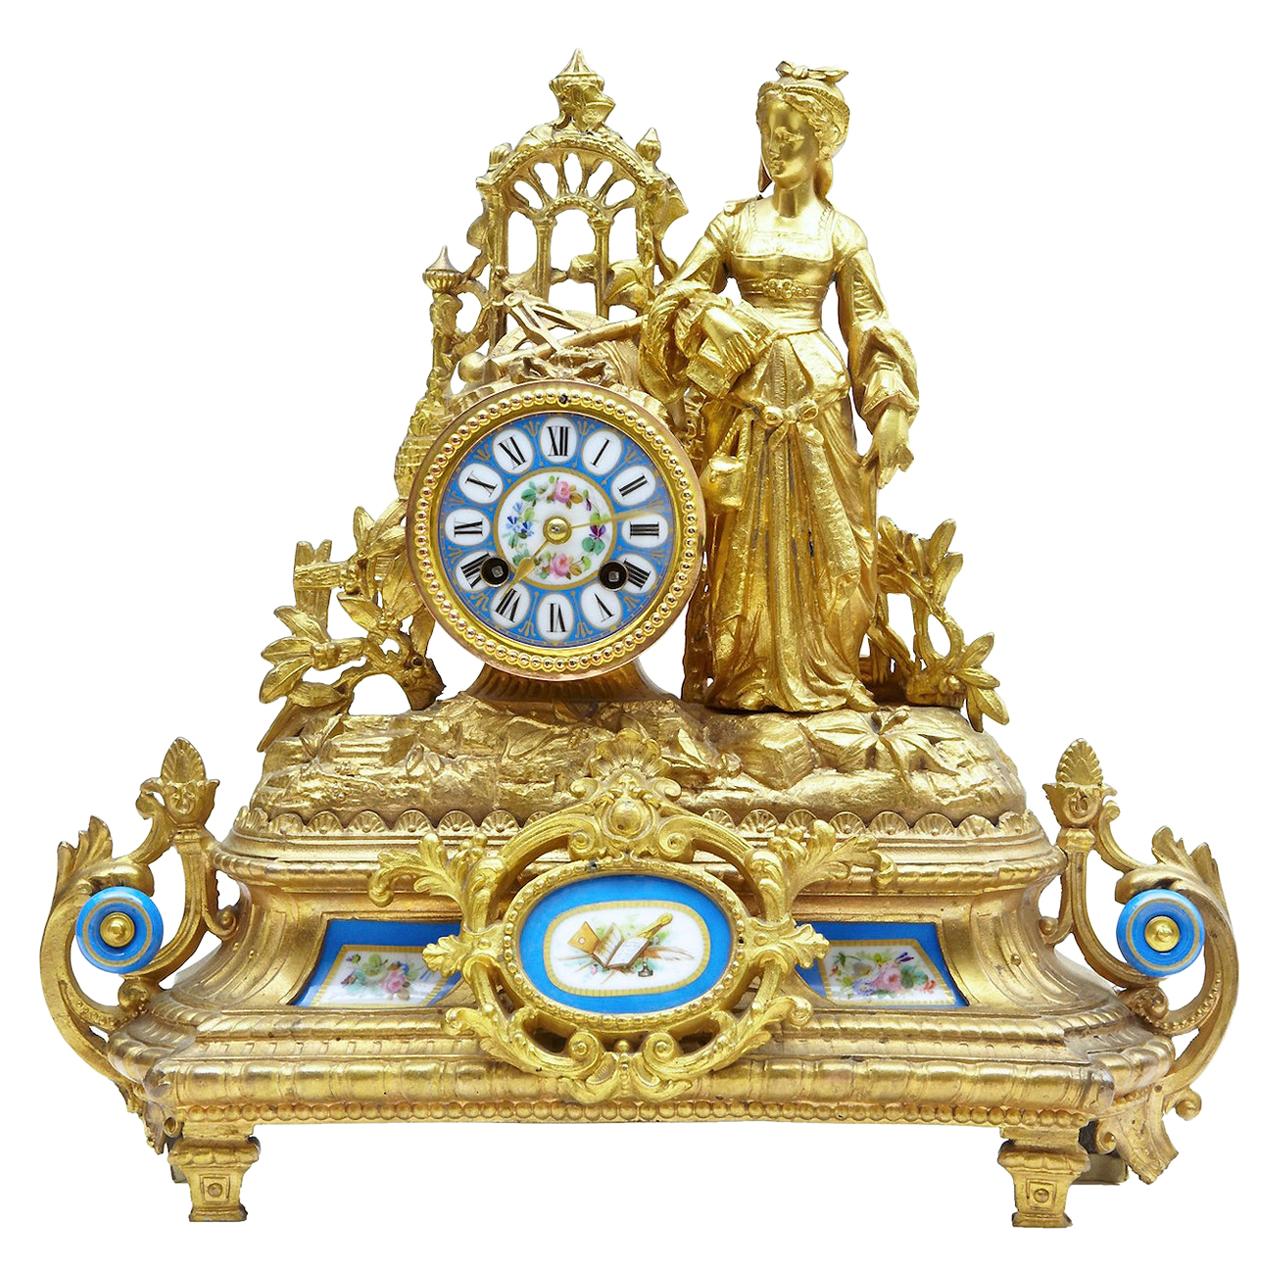 19th Century French Gilt Mantel Clock with Sèvres Plaques